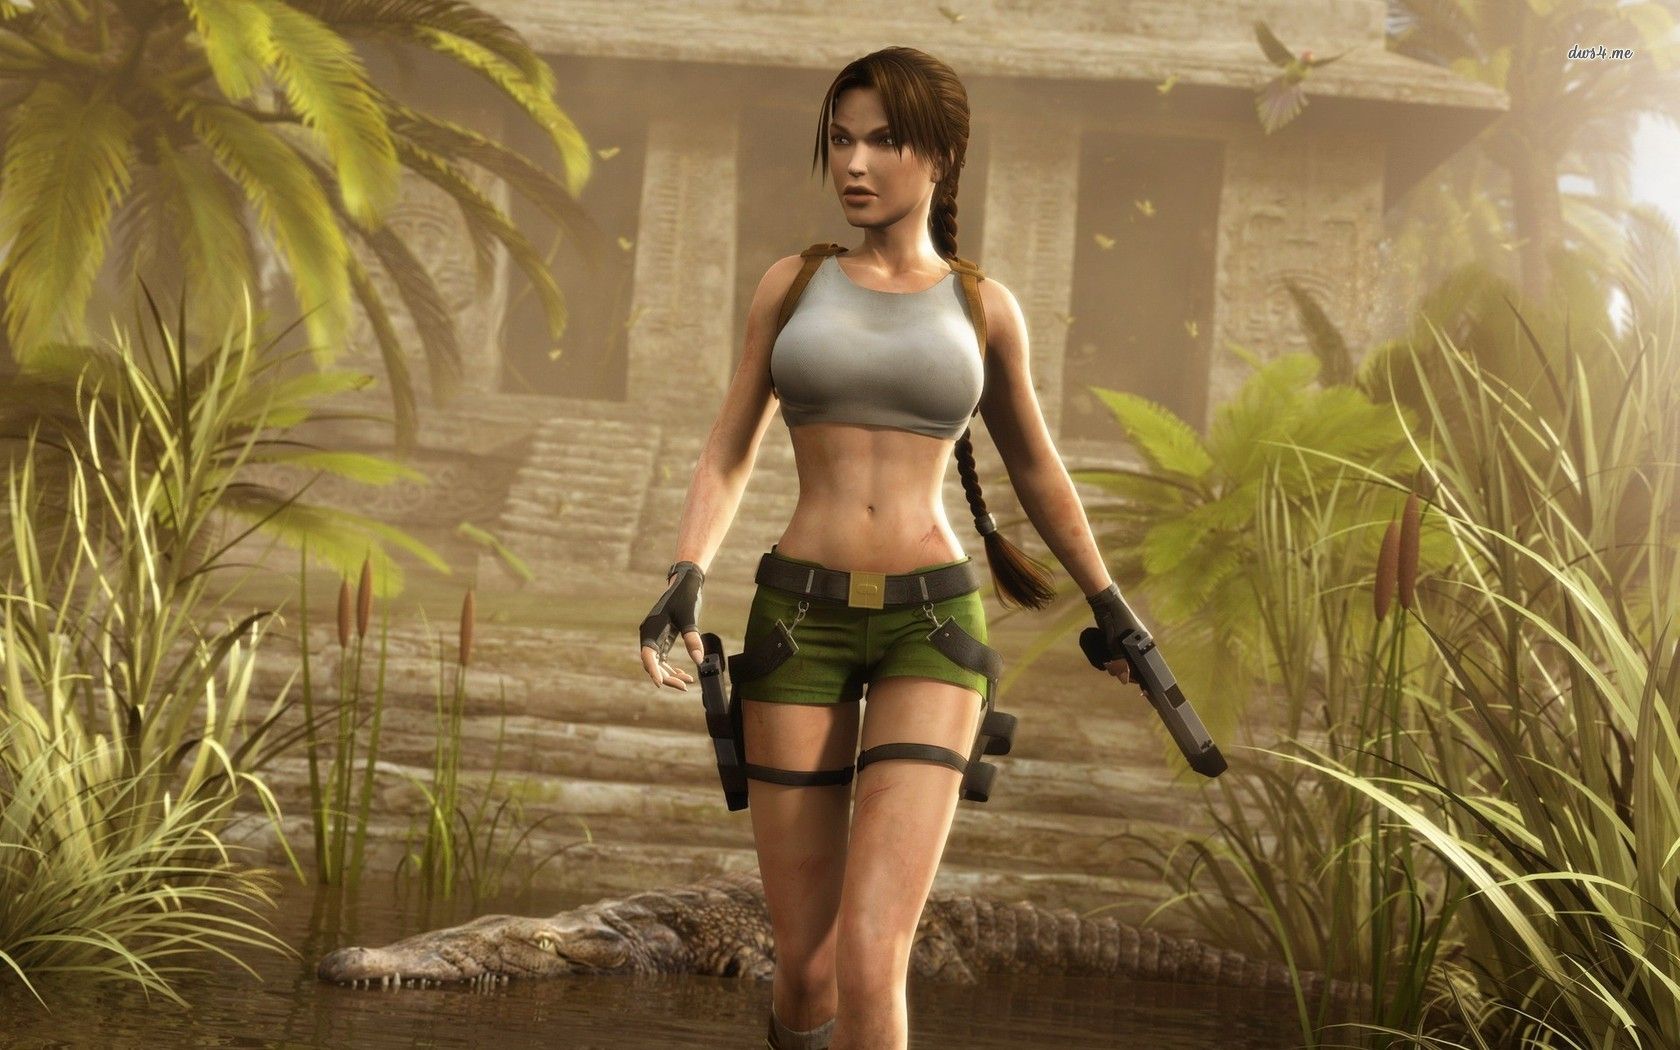 Lara Croft is the queen of the action-adventure genre. For two decades now and across multiple consoles she’s been solving puzzles, jumping across ledges, hunting for treasure and saving the world a dozen times over, and looking damn good doing it. Lara inspired most of the franchises we love today, like Uncharted, and that’s why she’s one of our heroes. Without her world-saving, globe-trotting adventures, gaming wouldn’t be what it is now.